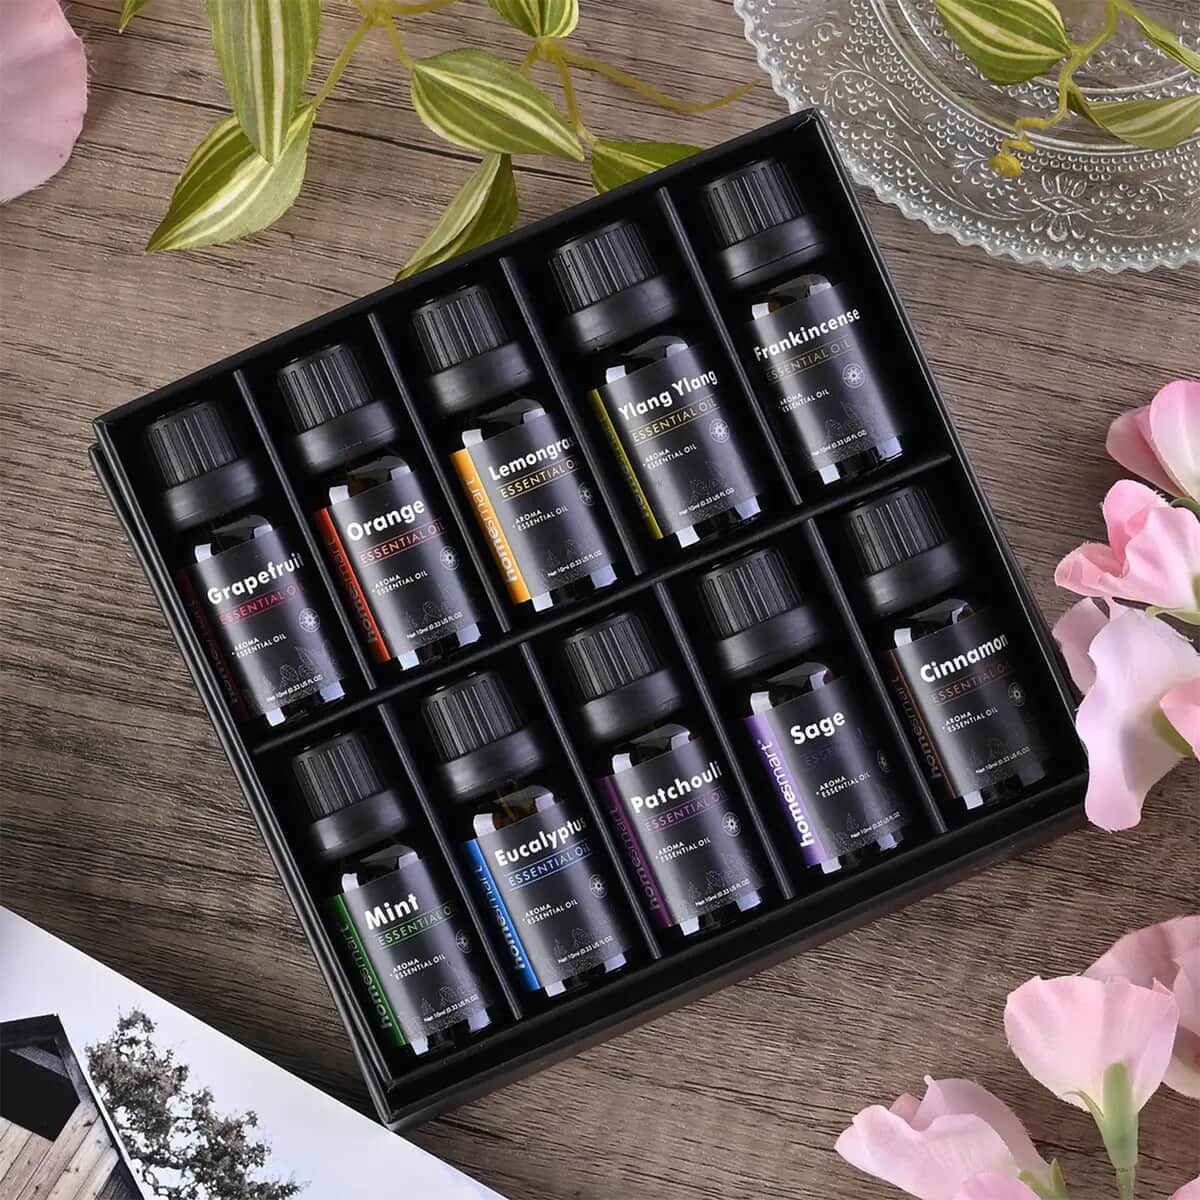 Set of 10 Ultimate Relaxation Essential Oil, Soothing and Stress Relief Aromatic Relaxing Massage Oils Set image number 1